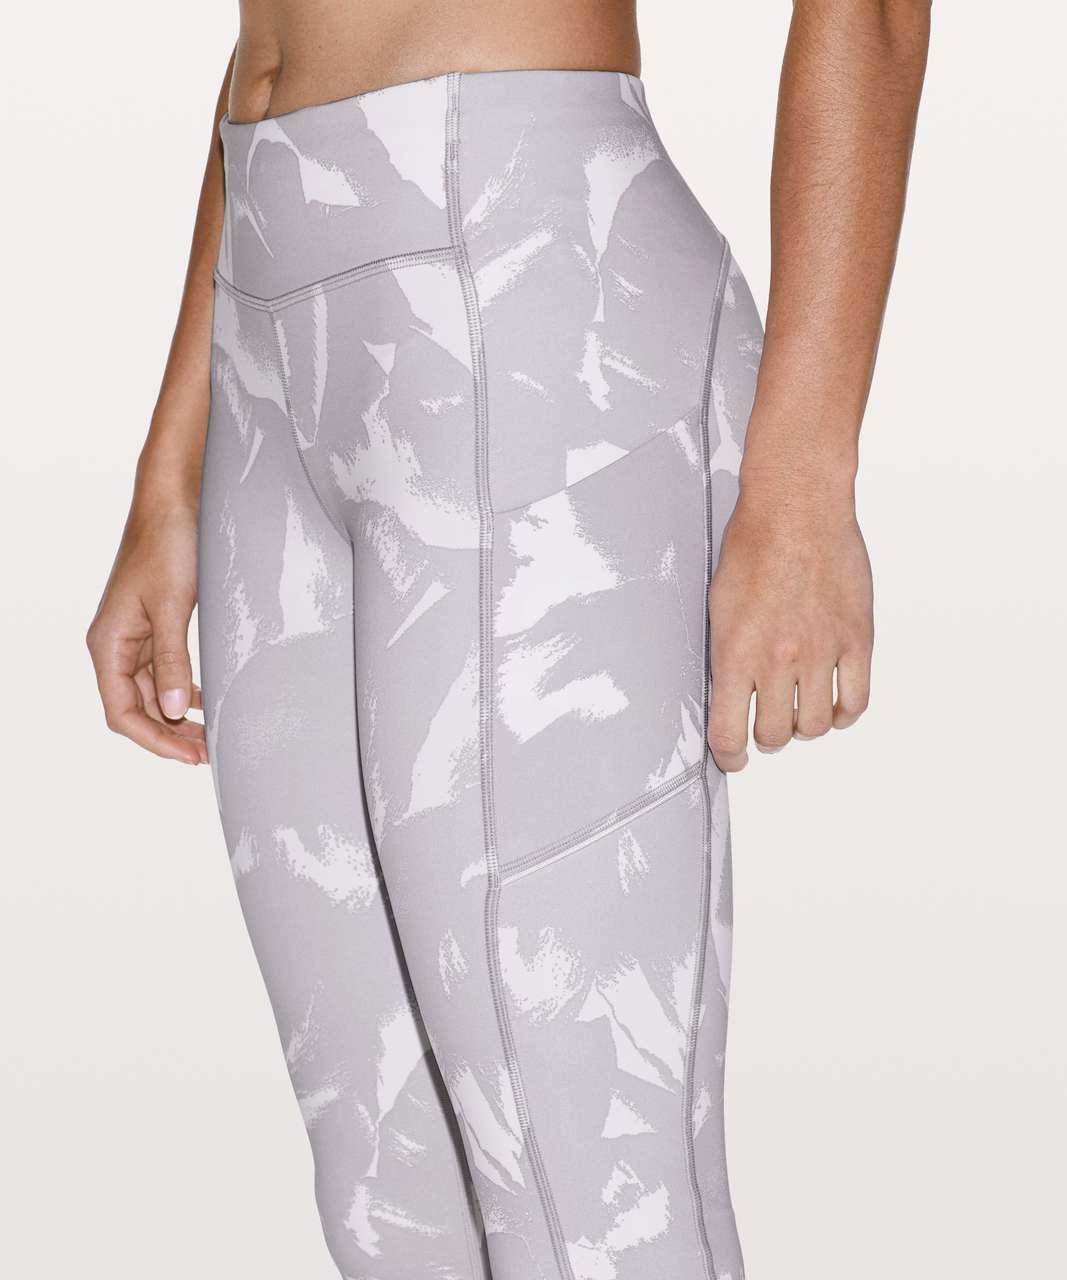 Lululemon Speed Up Tight 28" *Full-On Luxtreme - Flower Pop White Silver Lilac